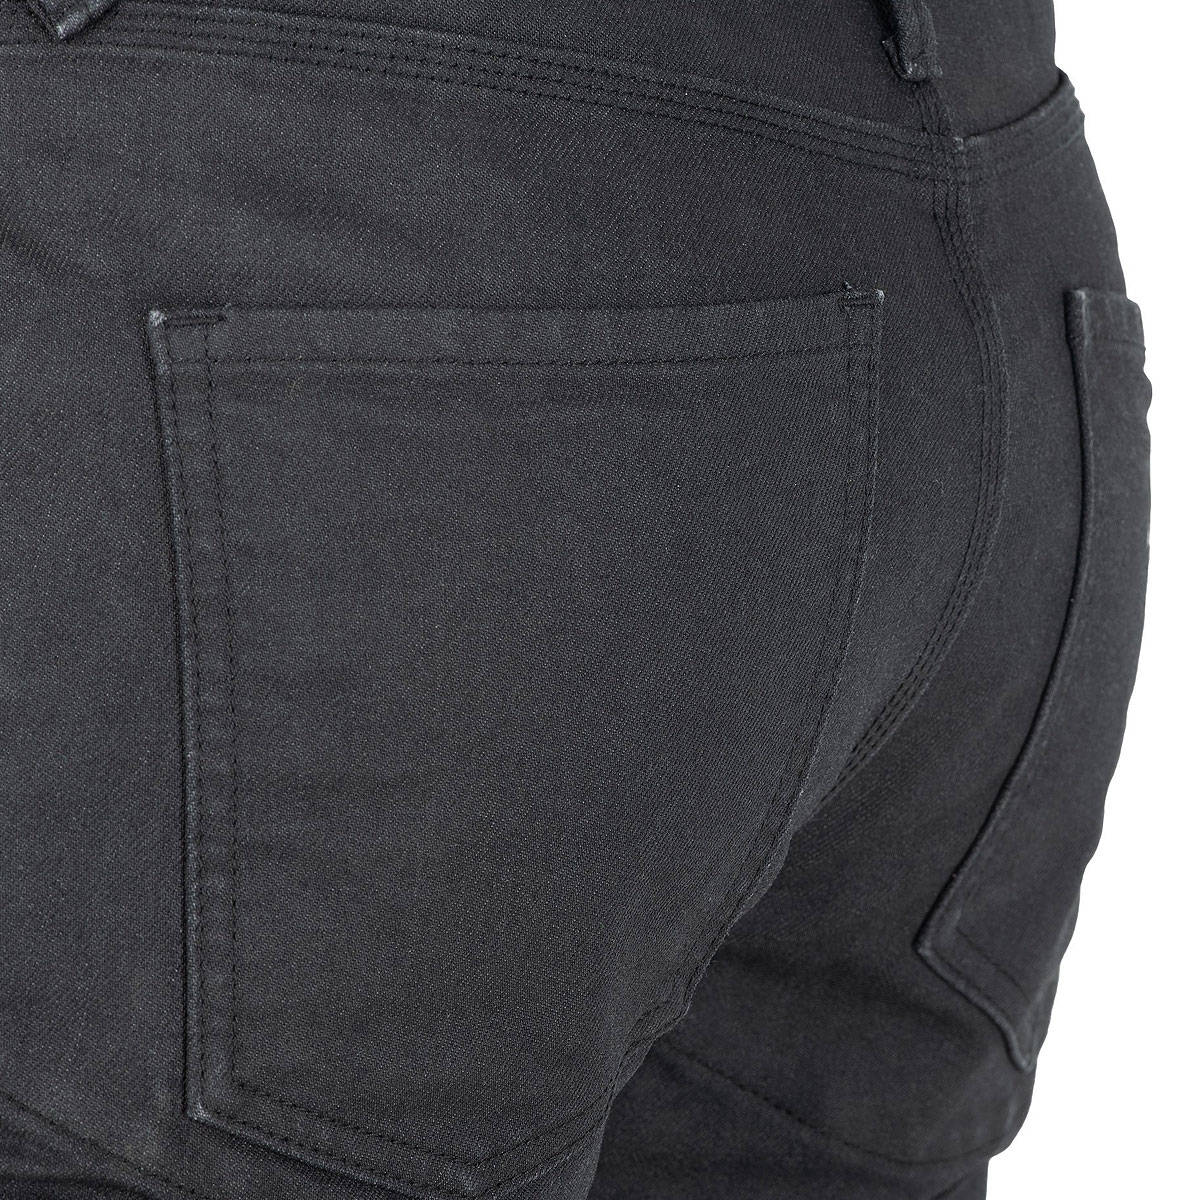 Oxford AAA Original Jeans in a straight fit: CE AAA rated single-layer motorcycle jeans - butt